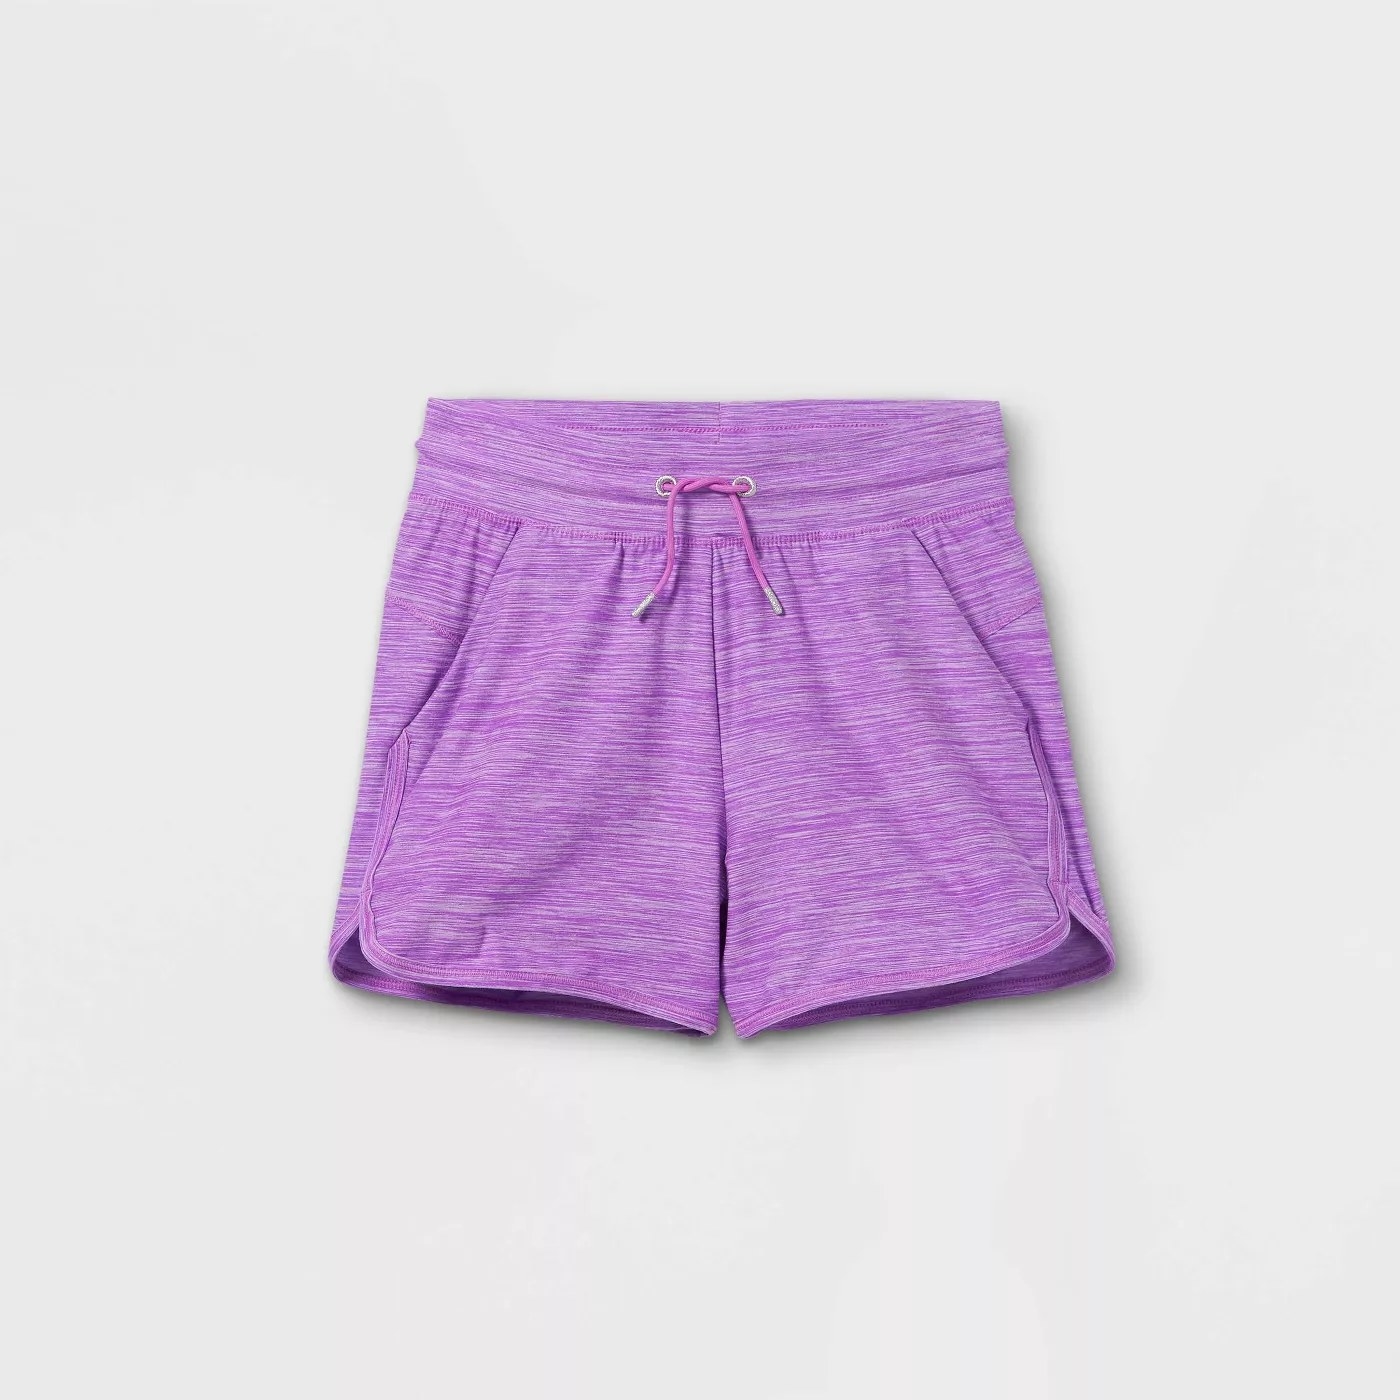 The heather violet gym shorts